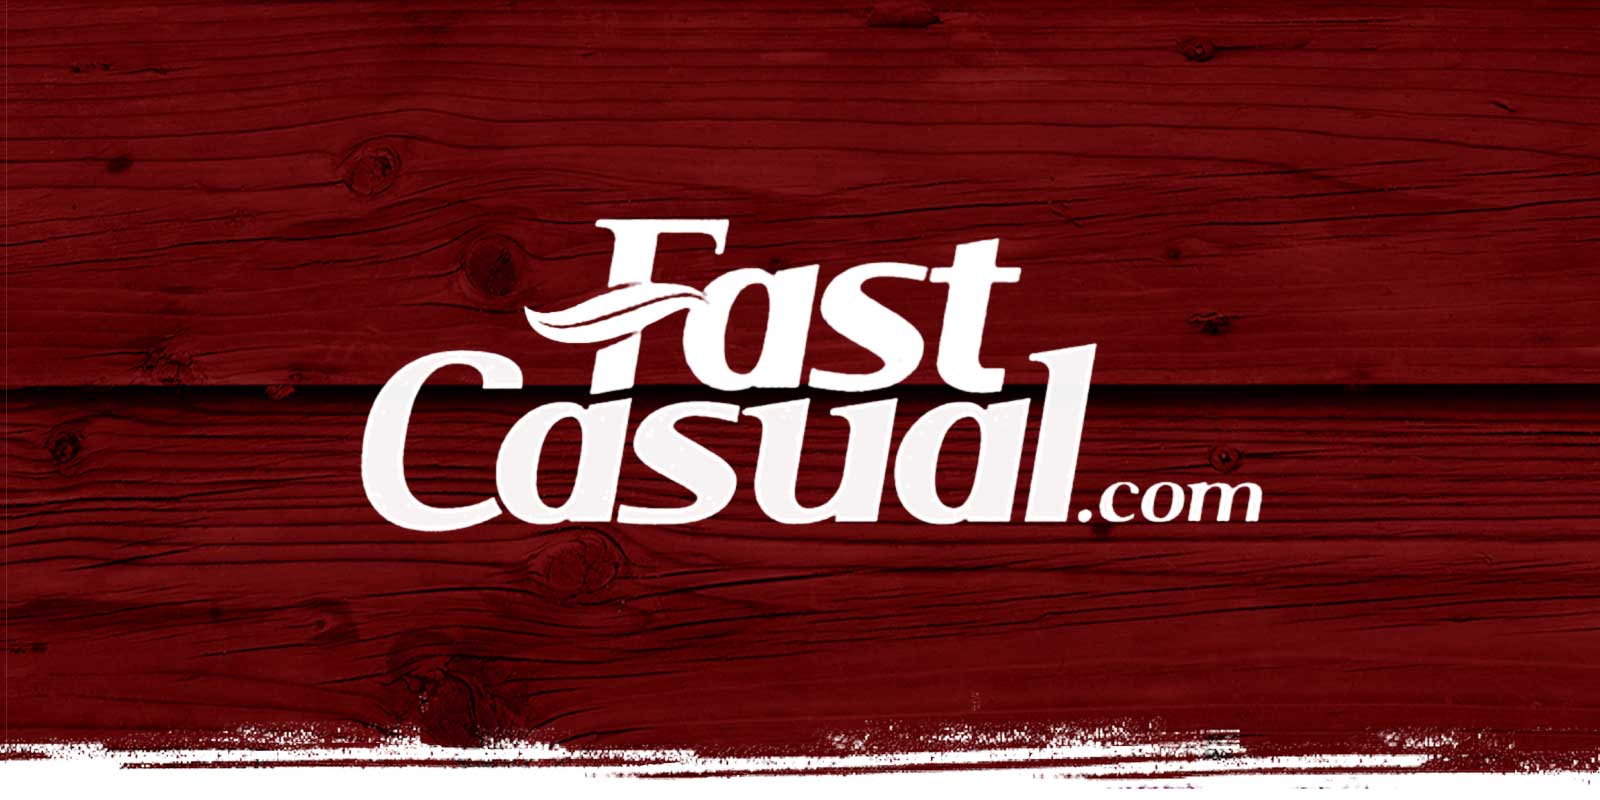 Fast Casual logo on red weathered wood background